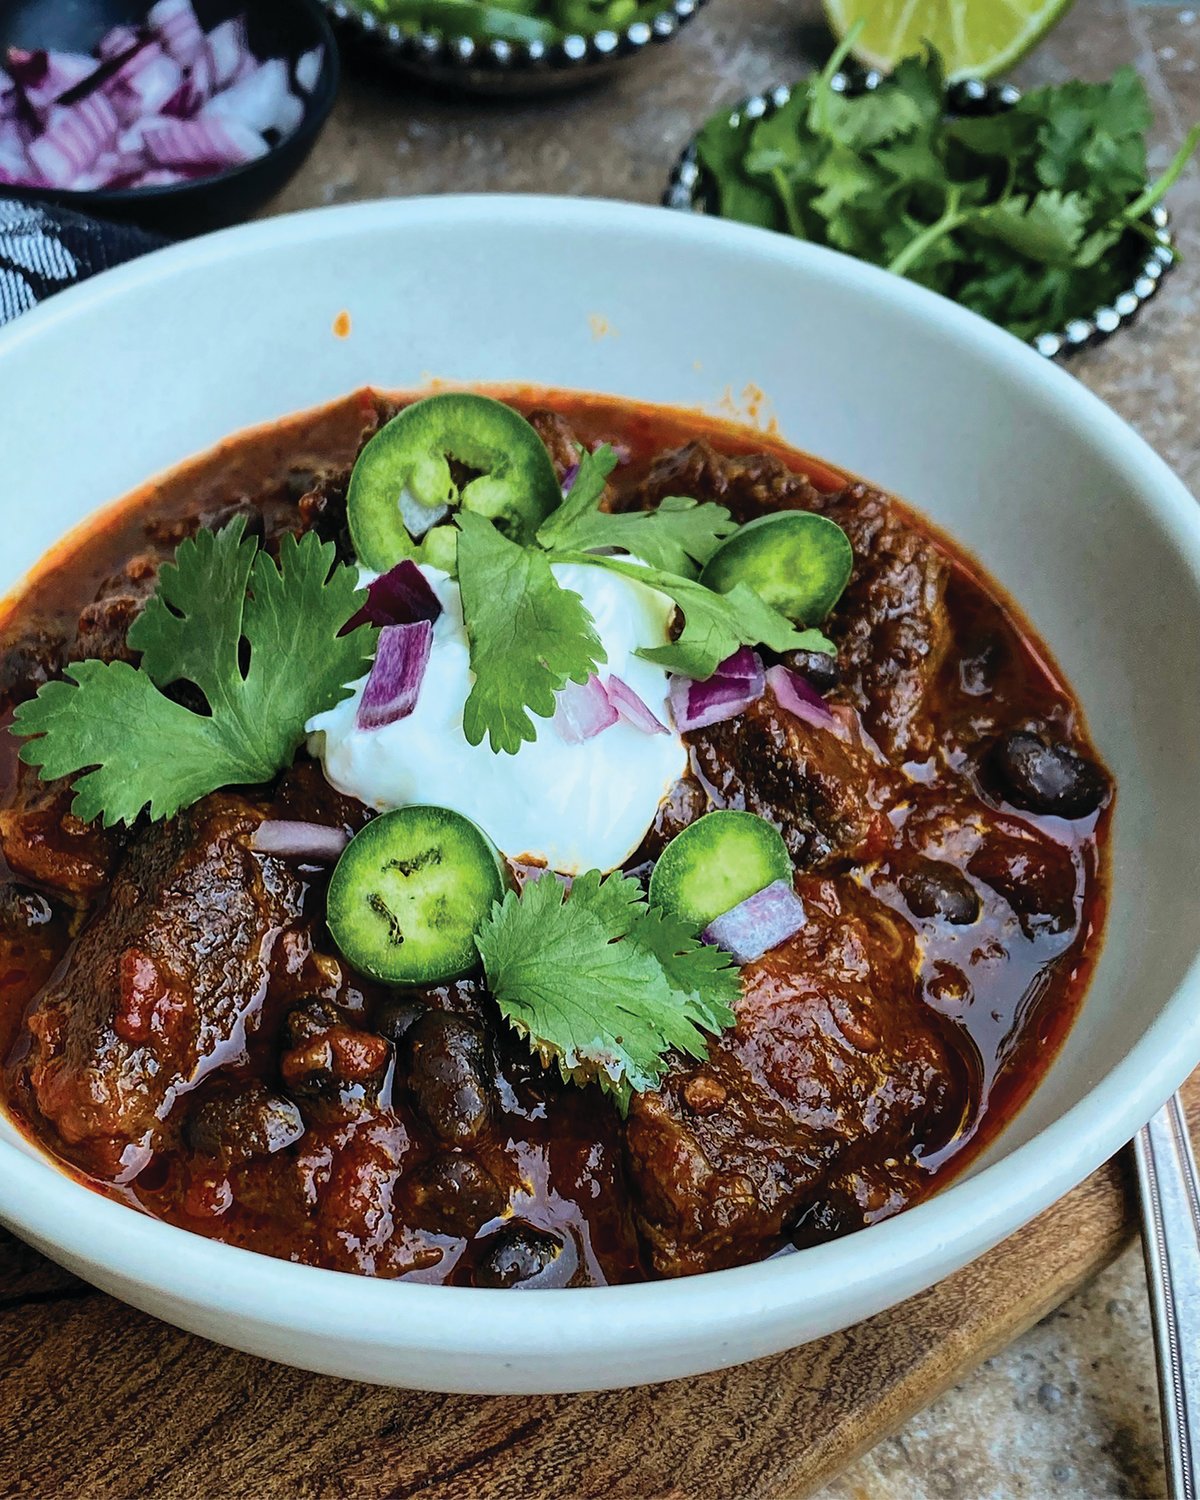 When you make this rich and meaty black bean stew, you will be rewarded with a comforting, deeply flavored chili, tinged with smoke and fragrant with spice.